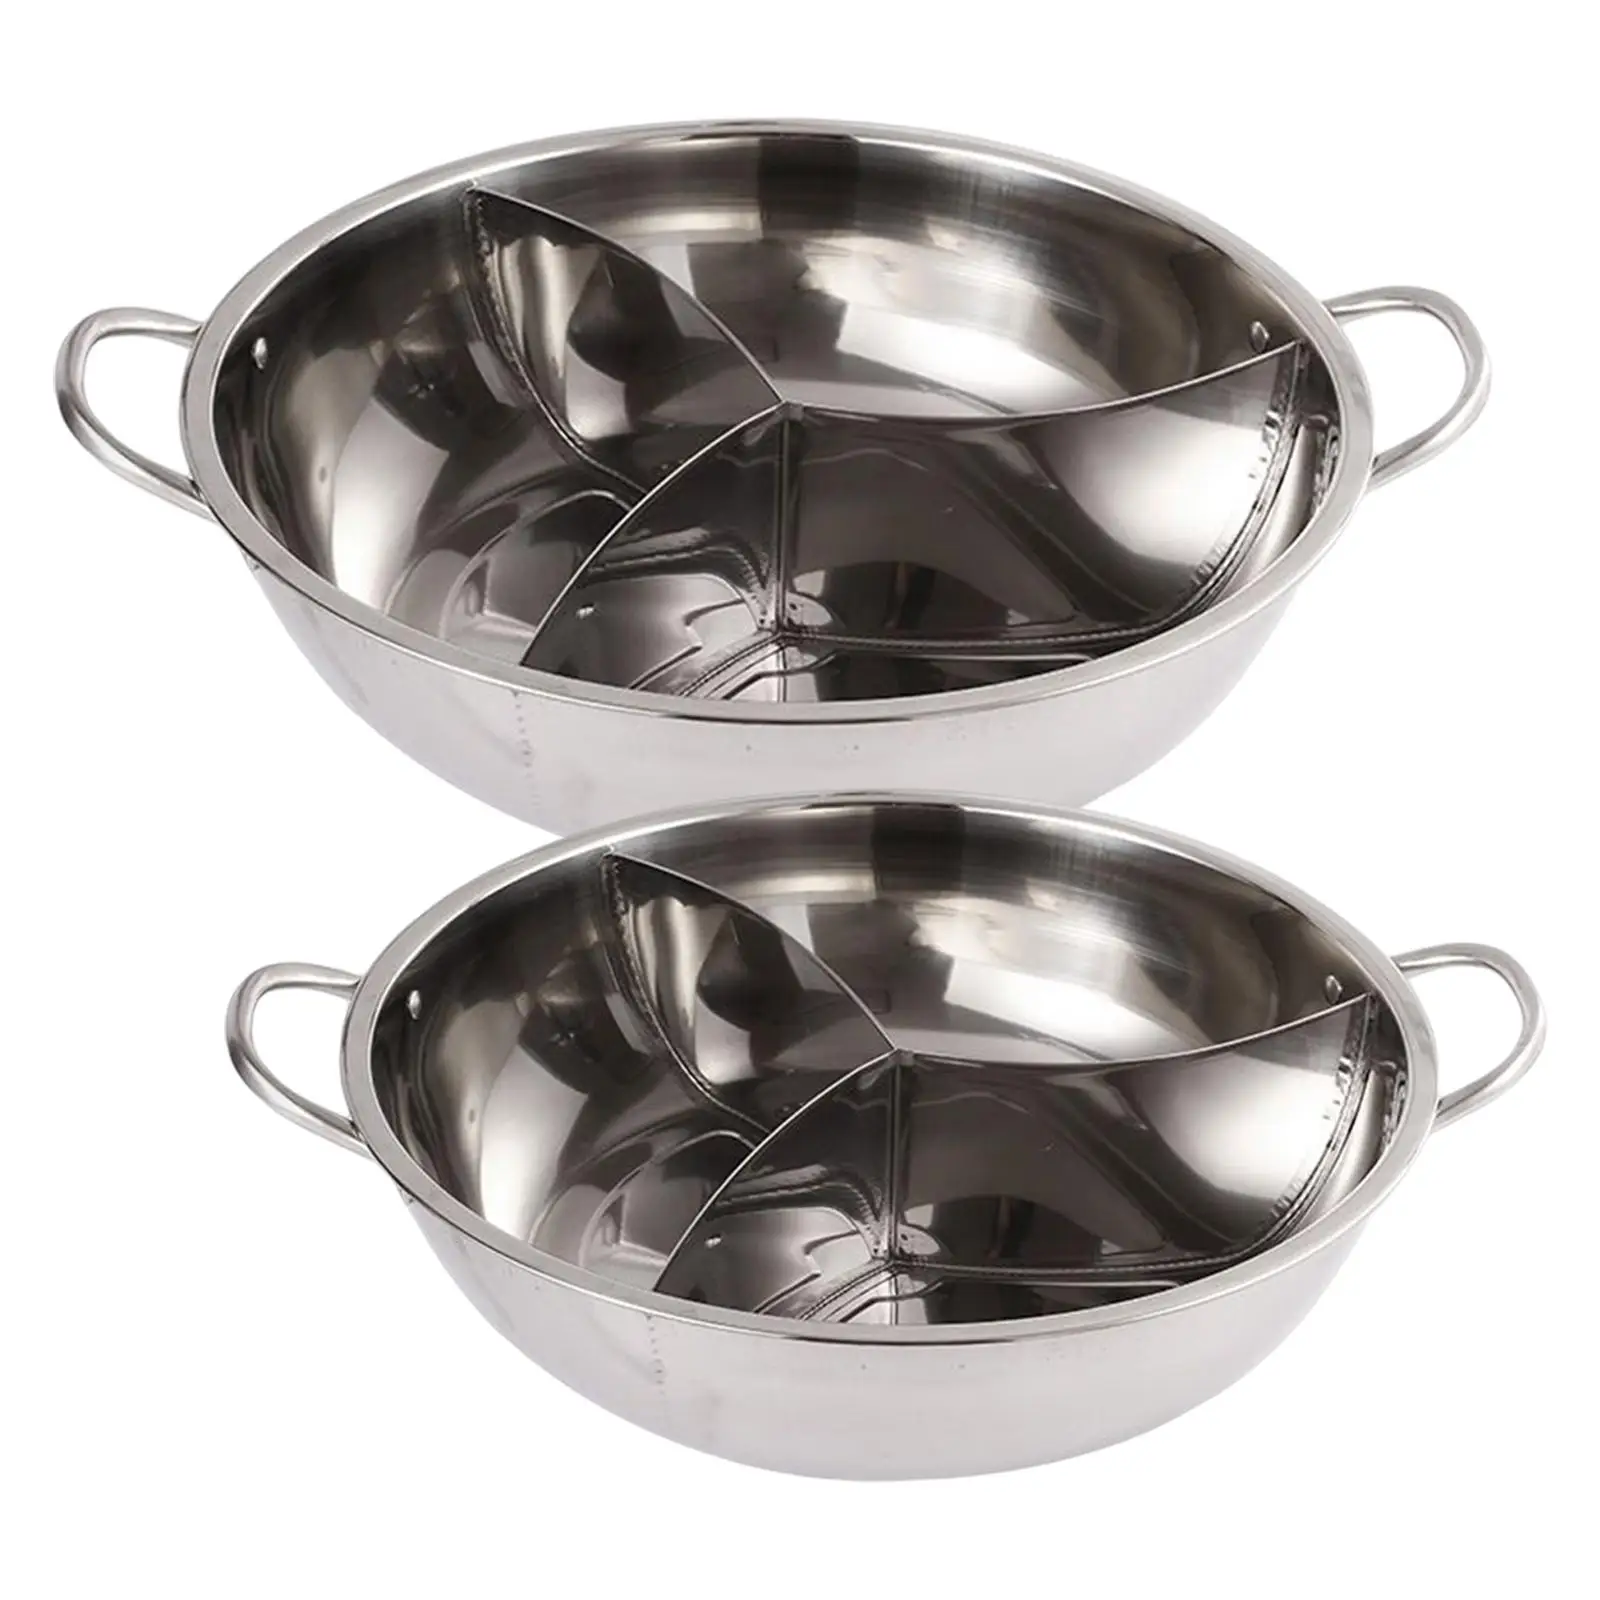 Household Hot Pot Induction Cookware with Divider for Restaurant Home Hotel